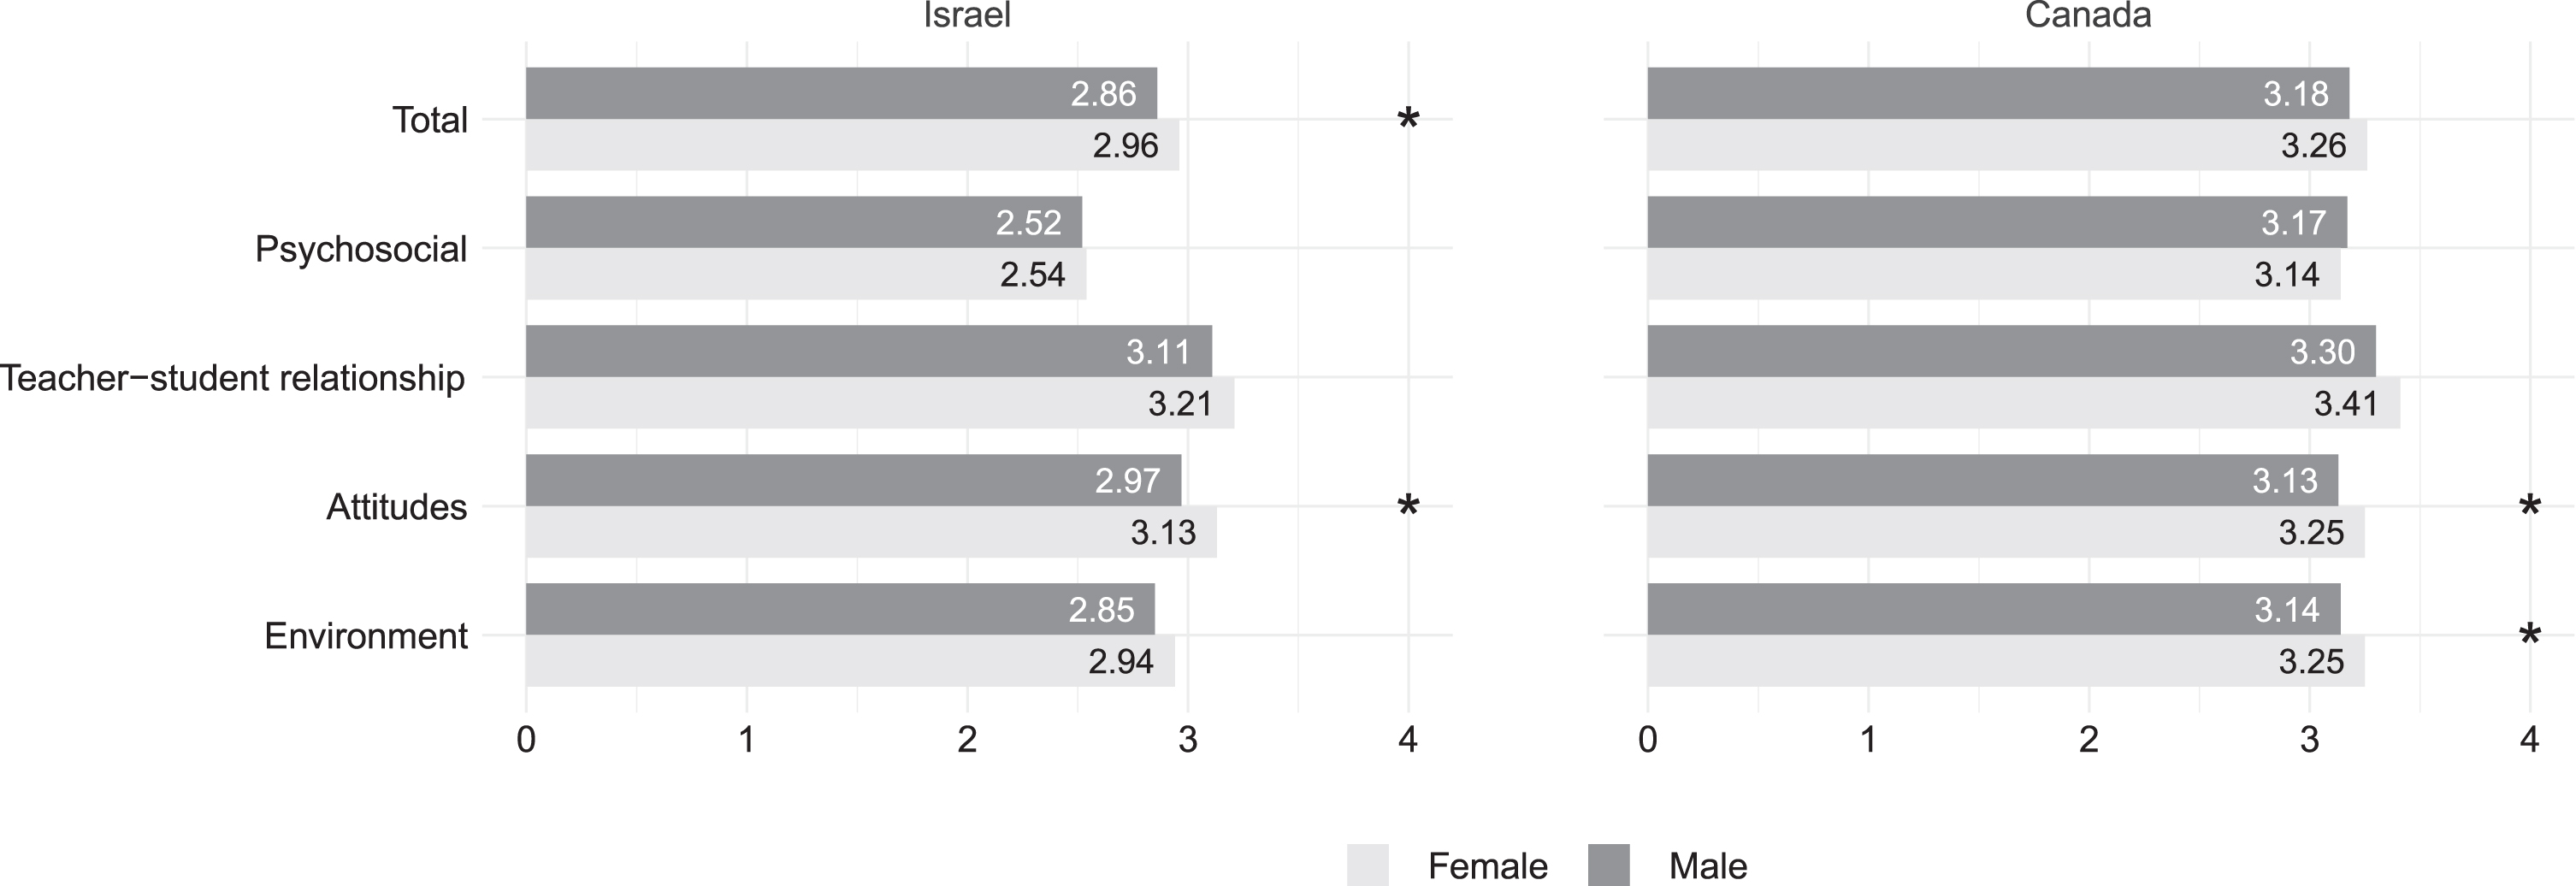 Gender differences in QoLS among Israeli and Canadian students.